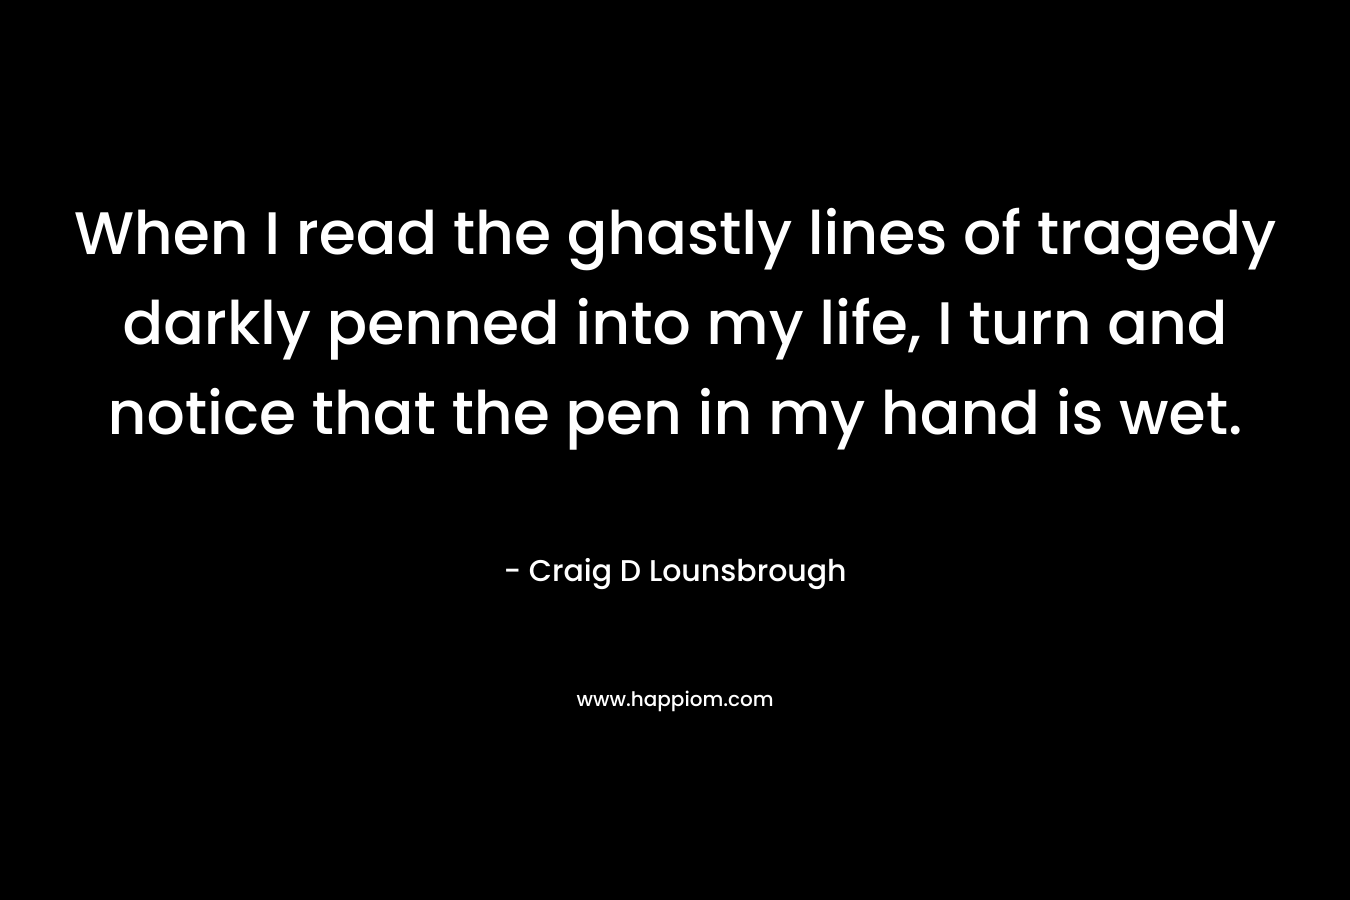 When I read the ghastly lines of tragedy darkly penned into my life, I turn and notice that the pen in my hand is wet.